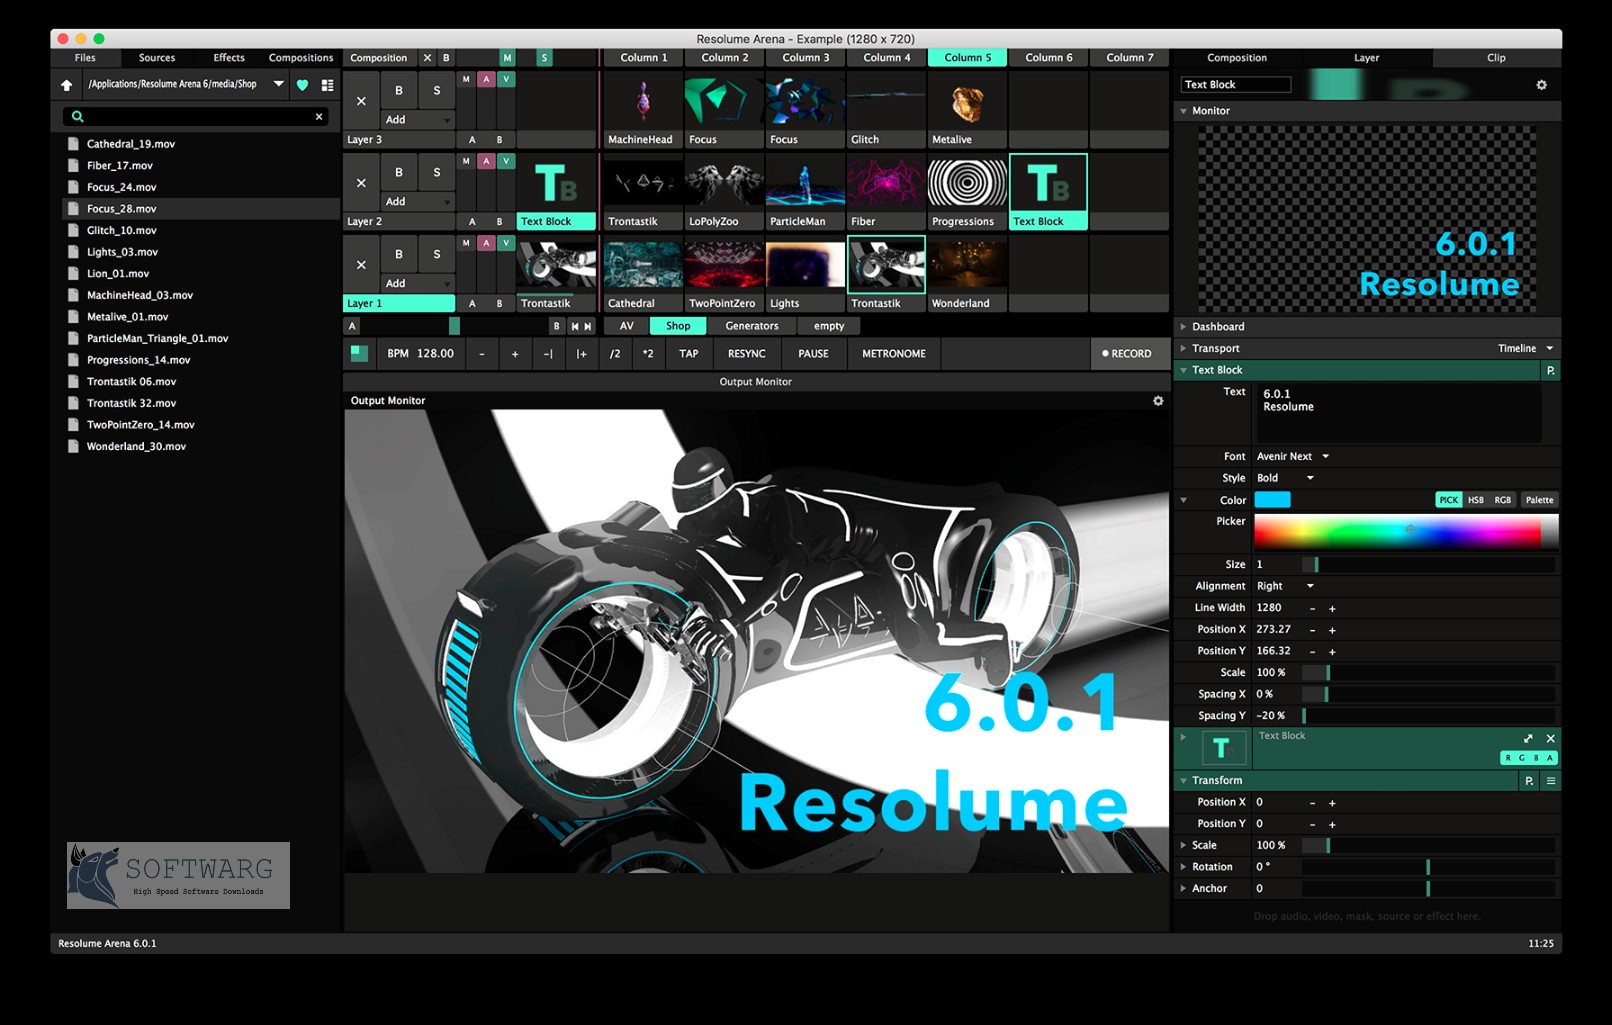 download the last version for apple Resolume Arena 7.18.1.29392